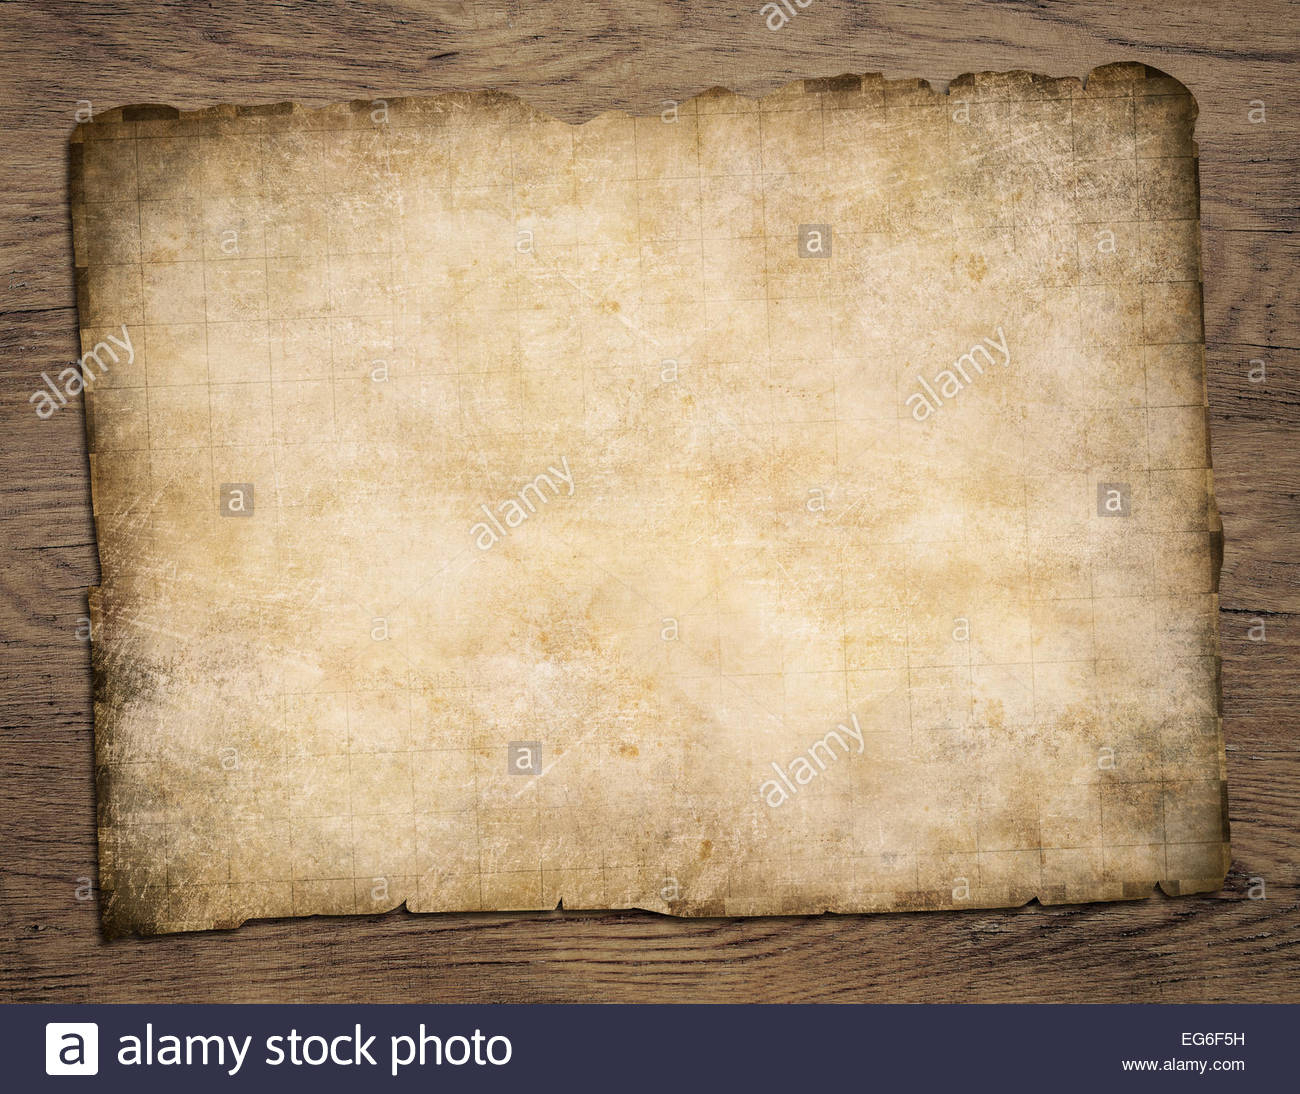 Old Blank Parchment Treasure Map On Wooden Table Stock Photo Intended For Blank Pirate Map Template